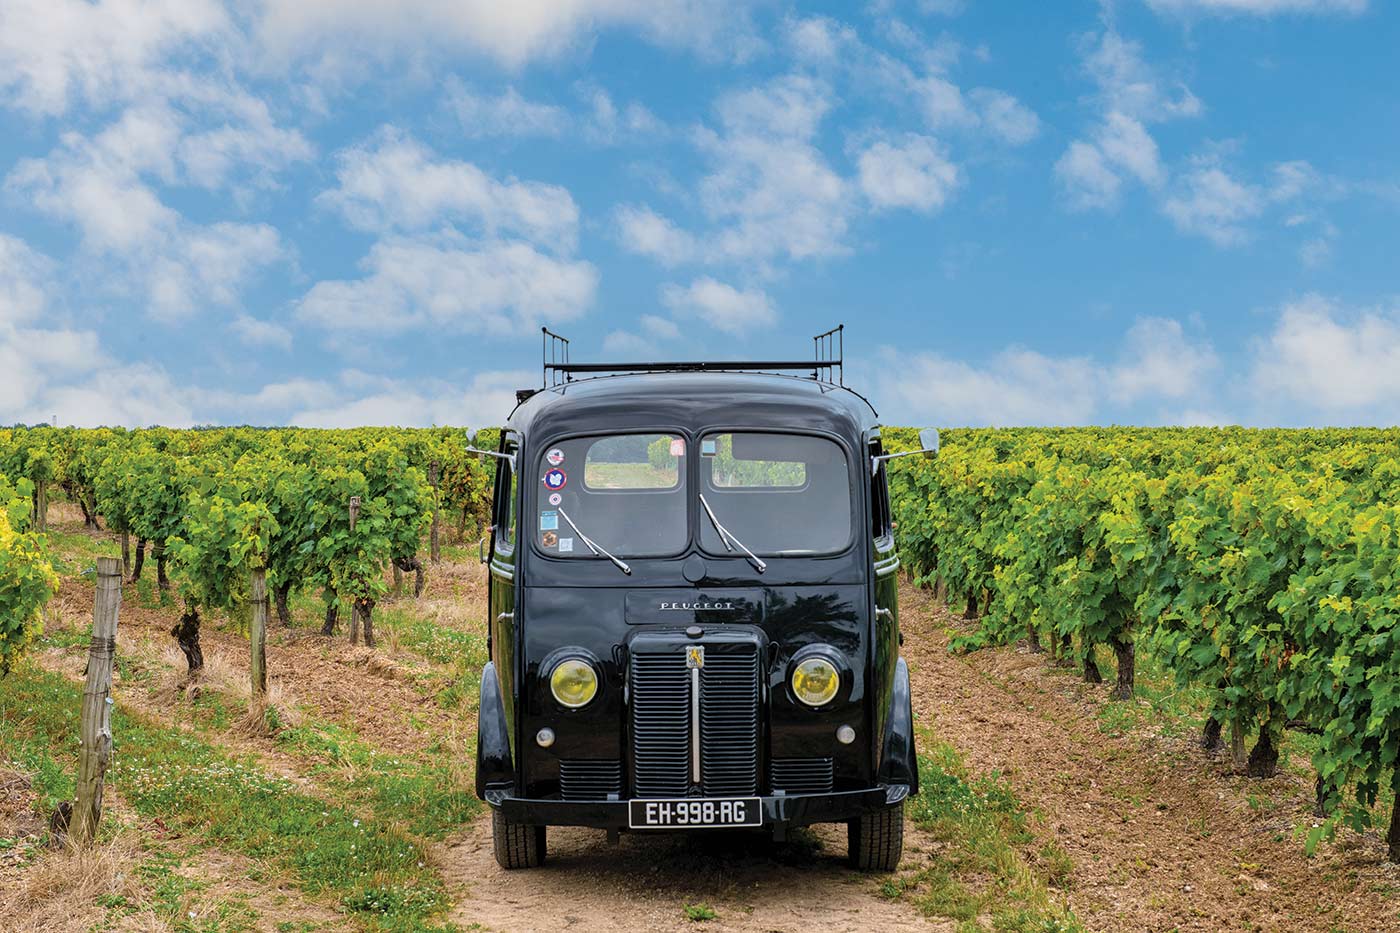 A vintage black European car sits in the middle of a bright green vineyard against a bright blue sky in Bourgoin Cognac